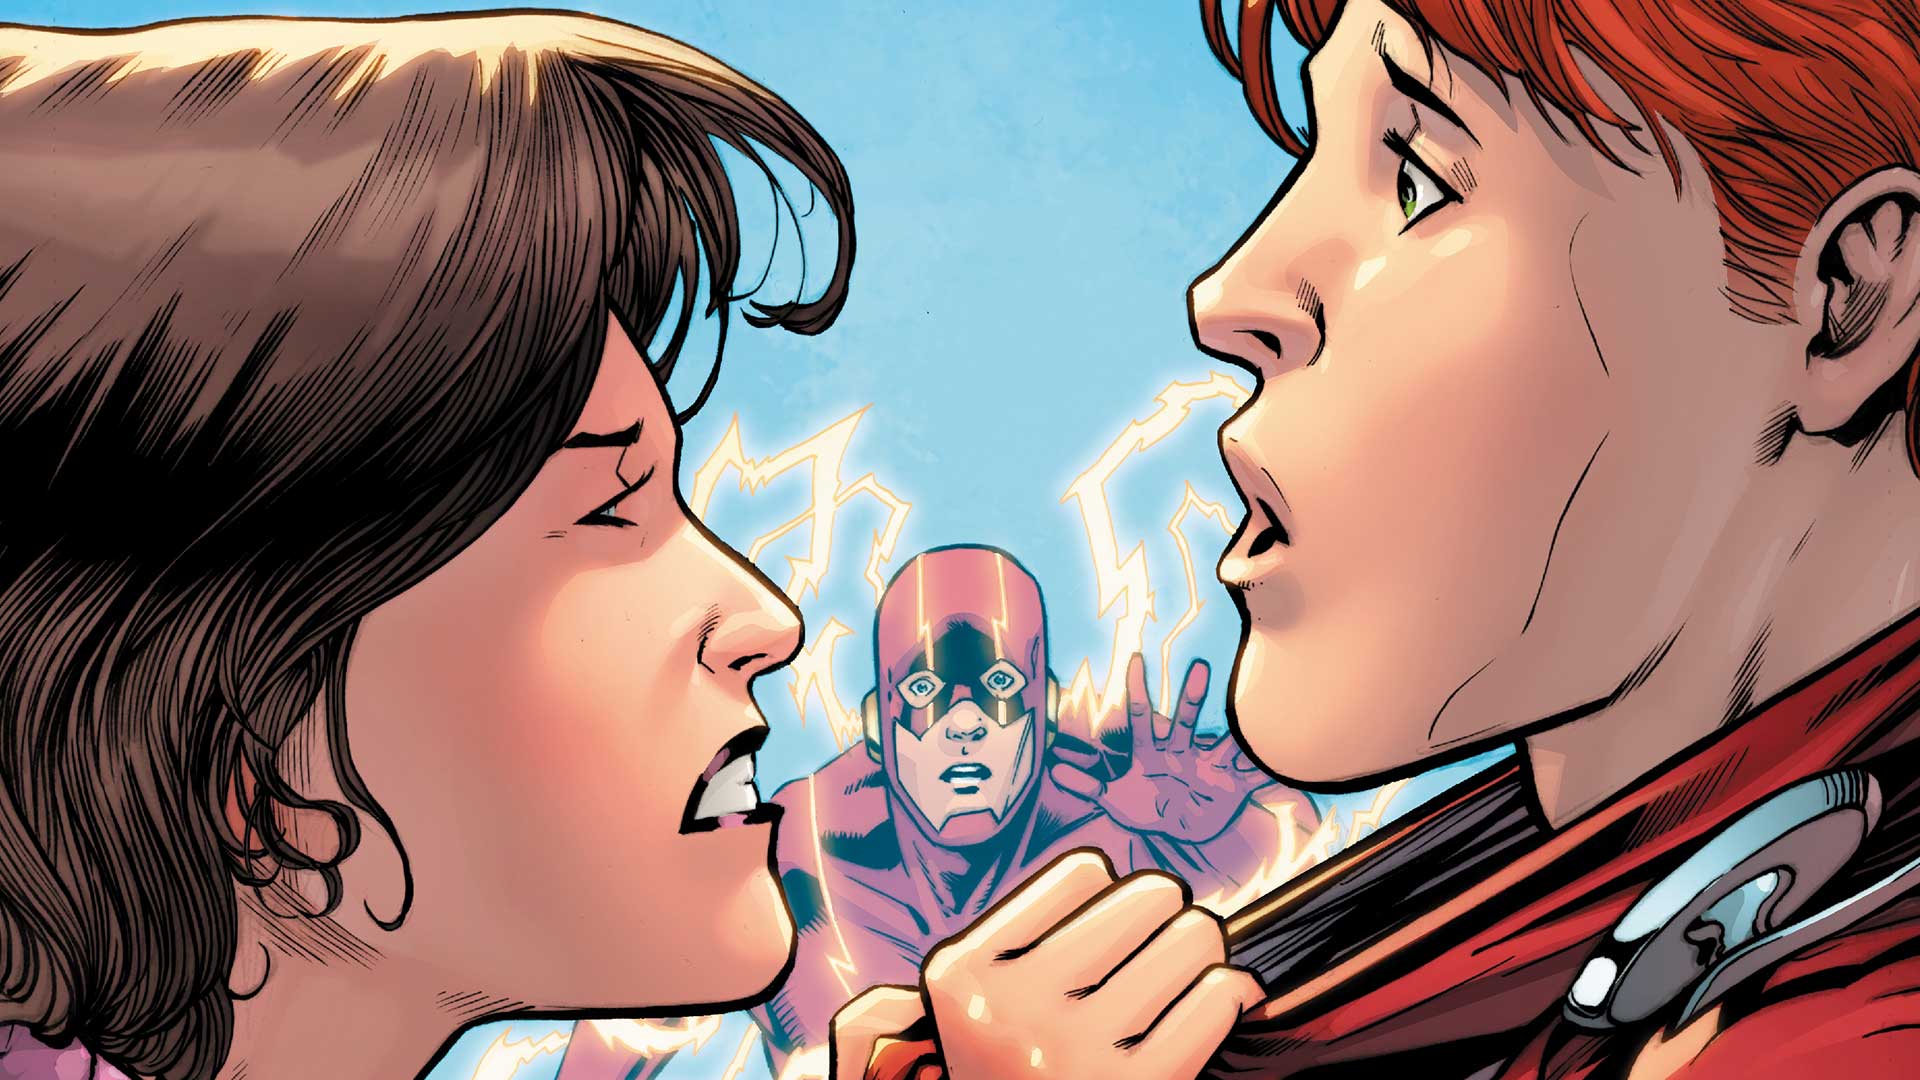 The Flash #45 Review